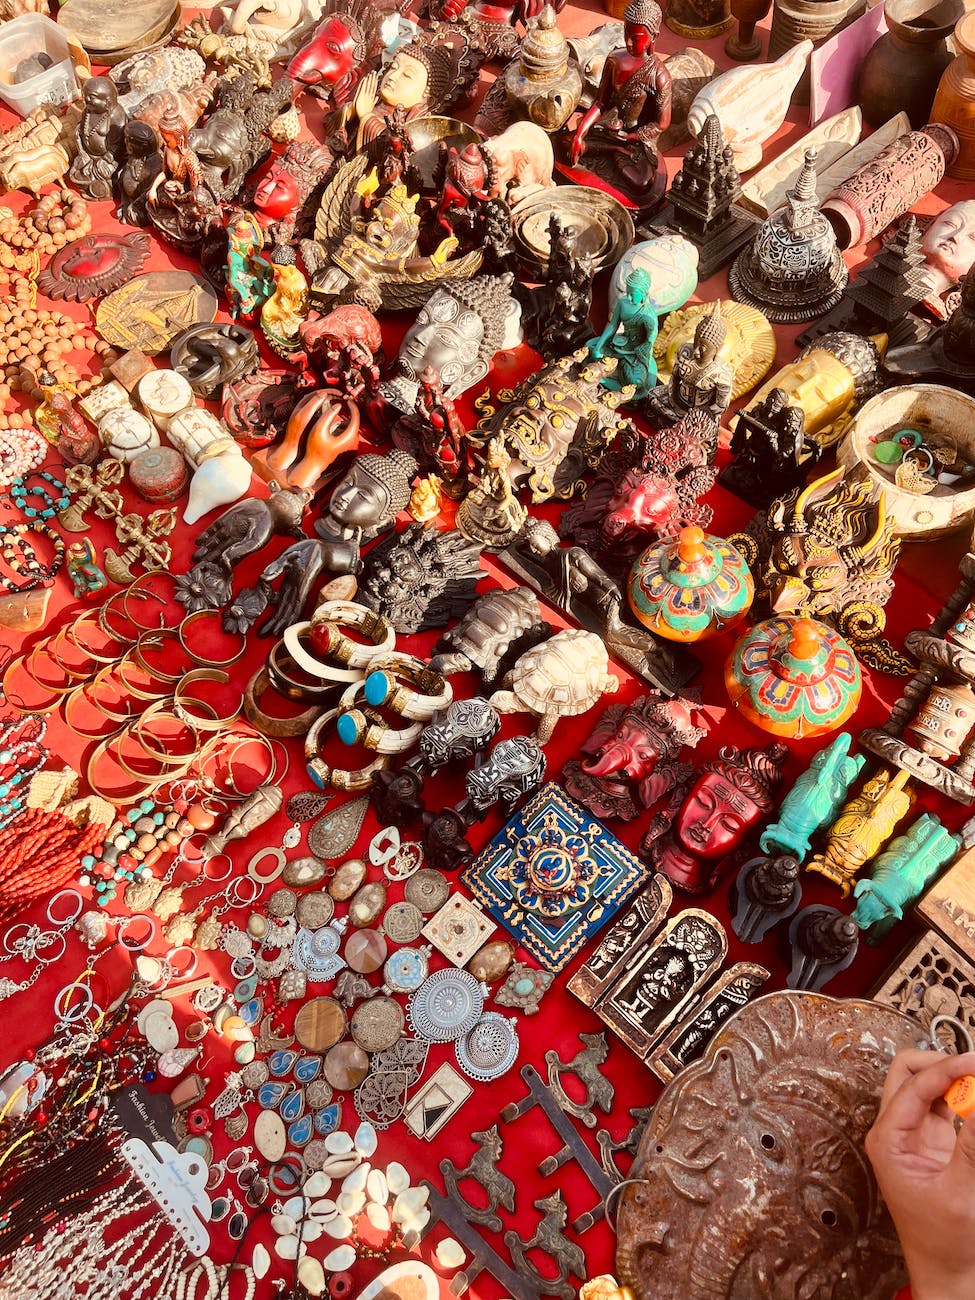 vintage jewelry and accessories on table on market